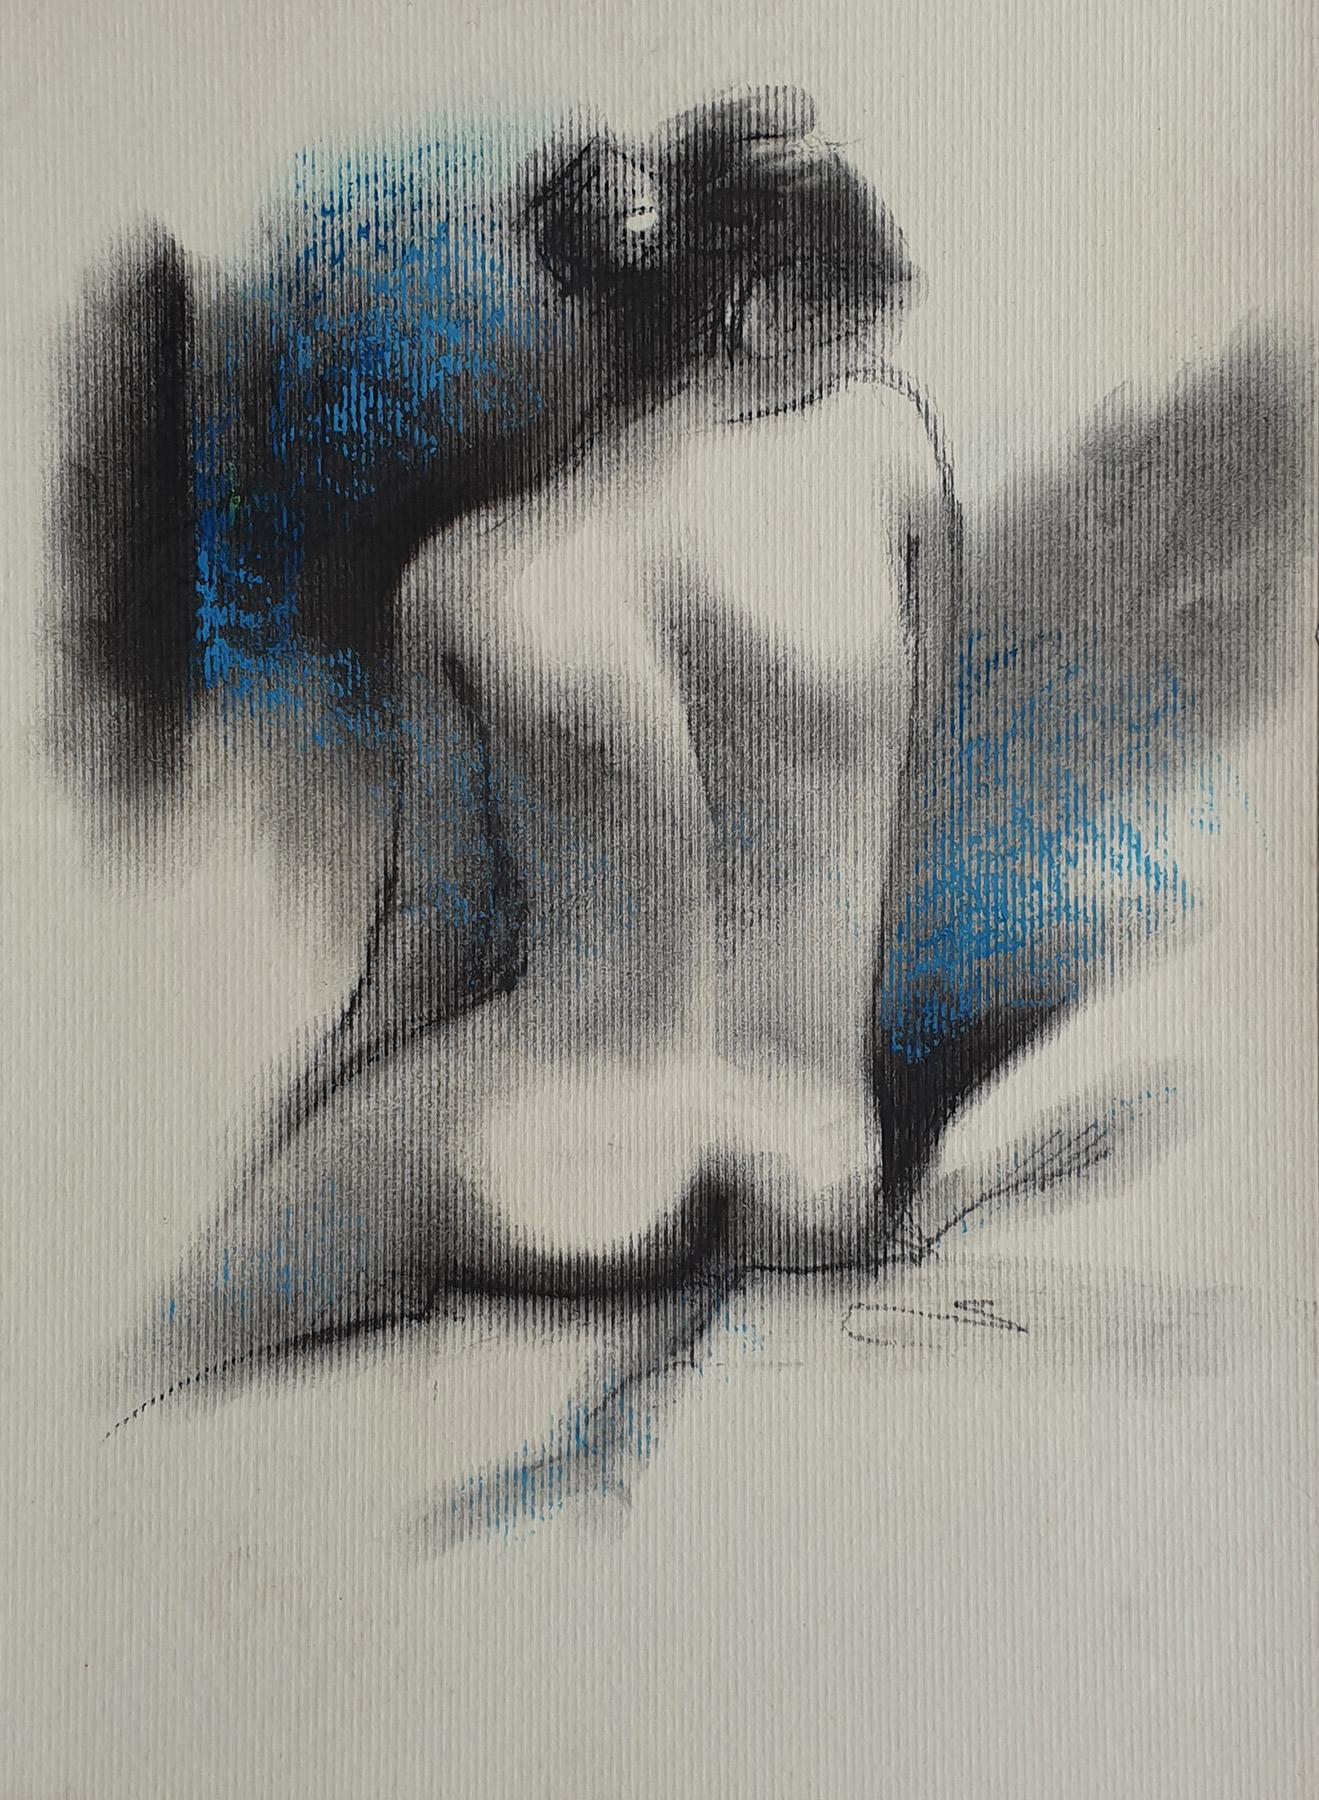 Nude, Seated Women, Charcoal & Pastel on Board, Blue, Black colors "In Stock" - Art by Subrata Das